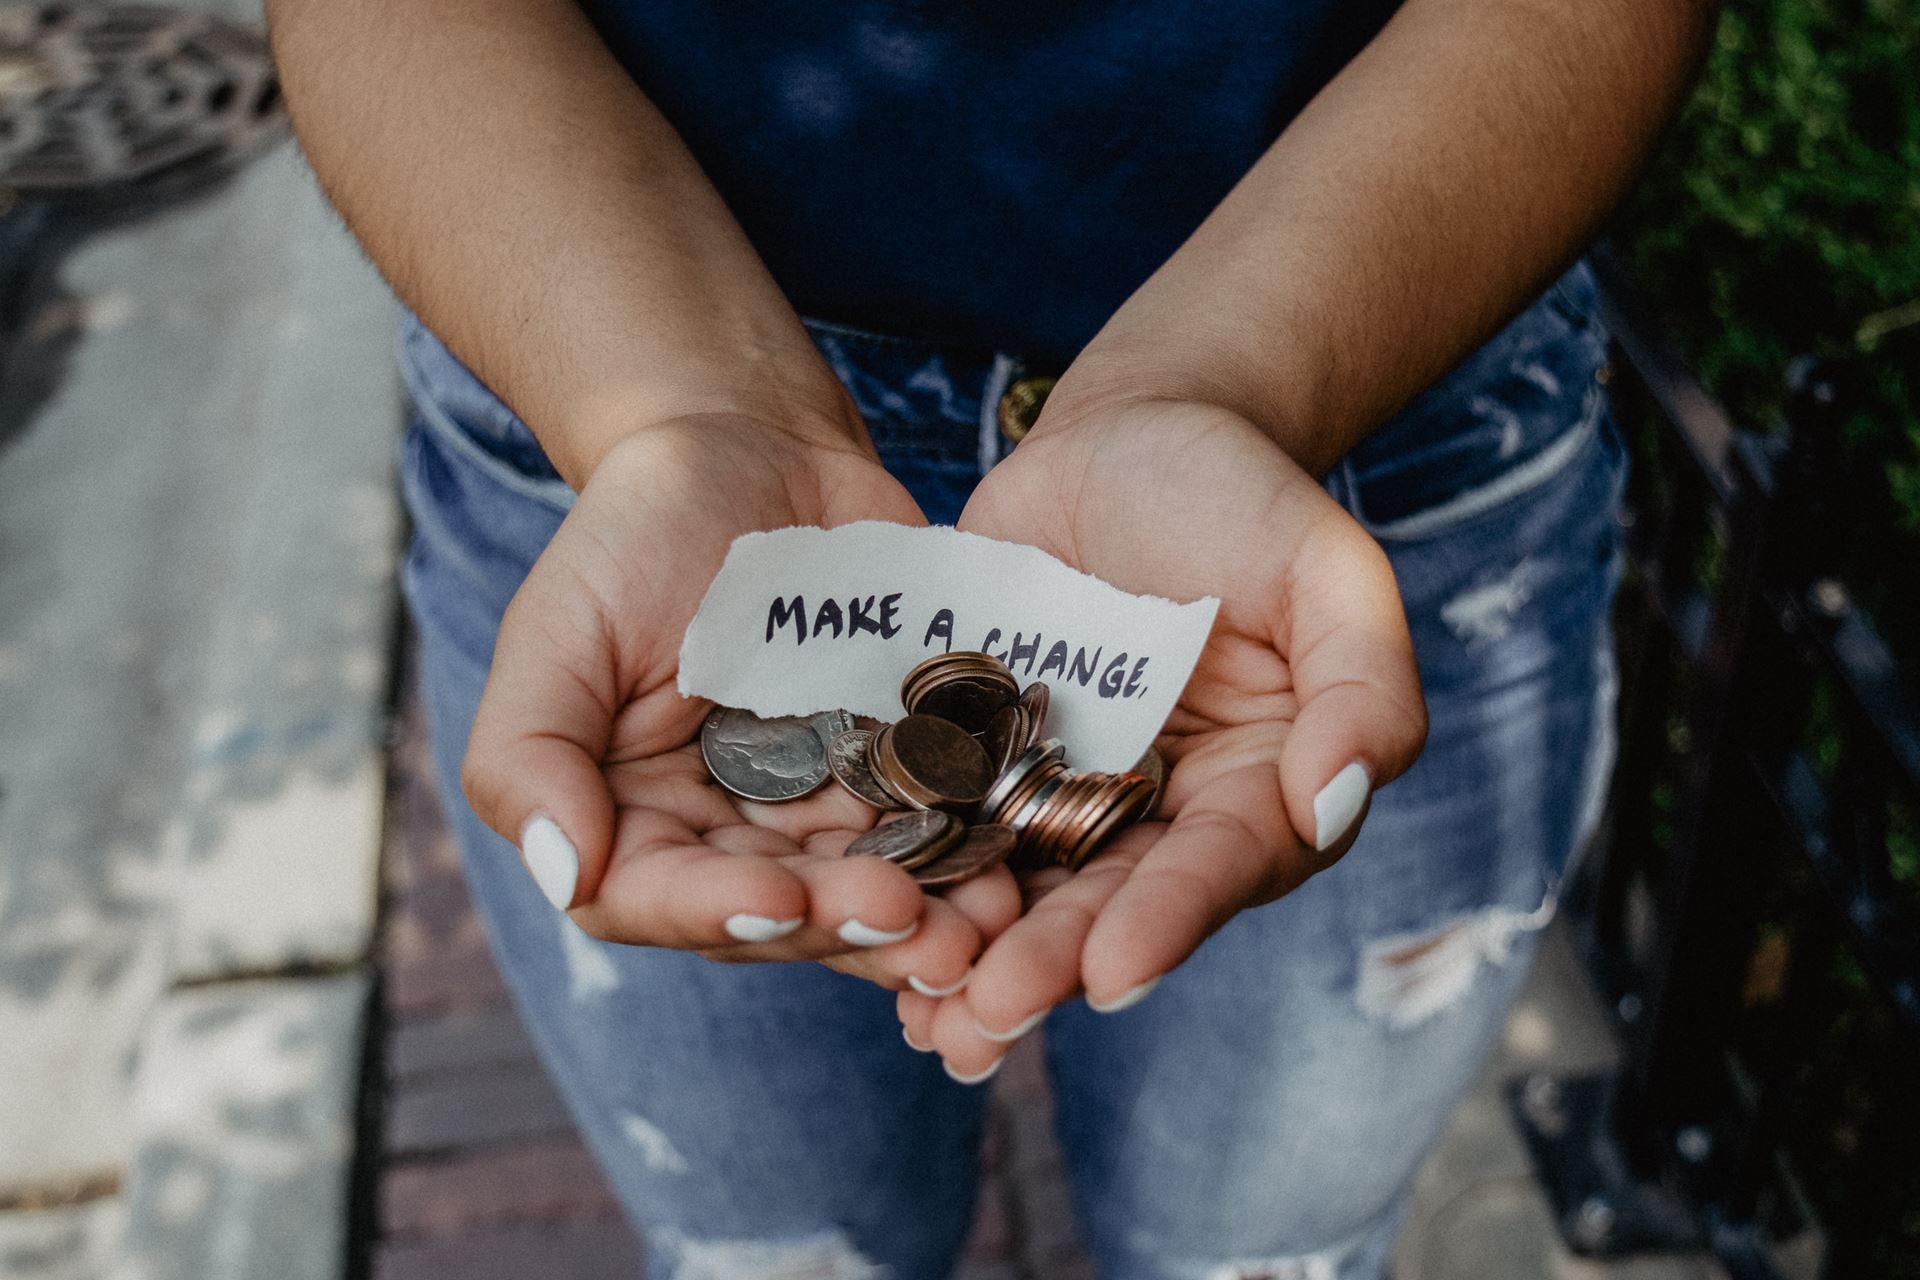 Image of hands holding a pile of a change and a note that says make a change. Photo by Kat Yukawa on Unsplash.